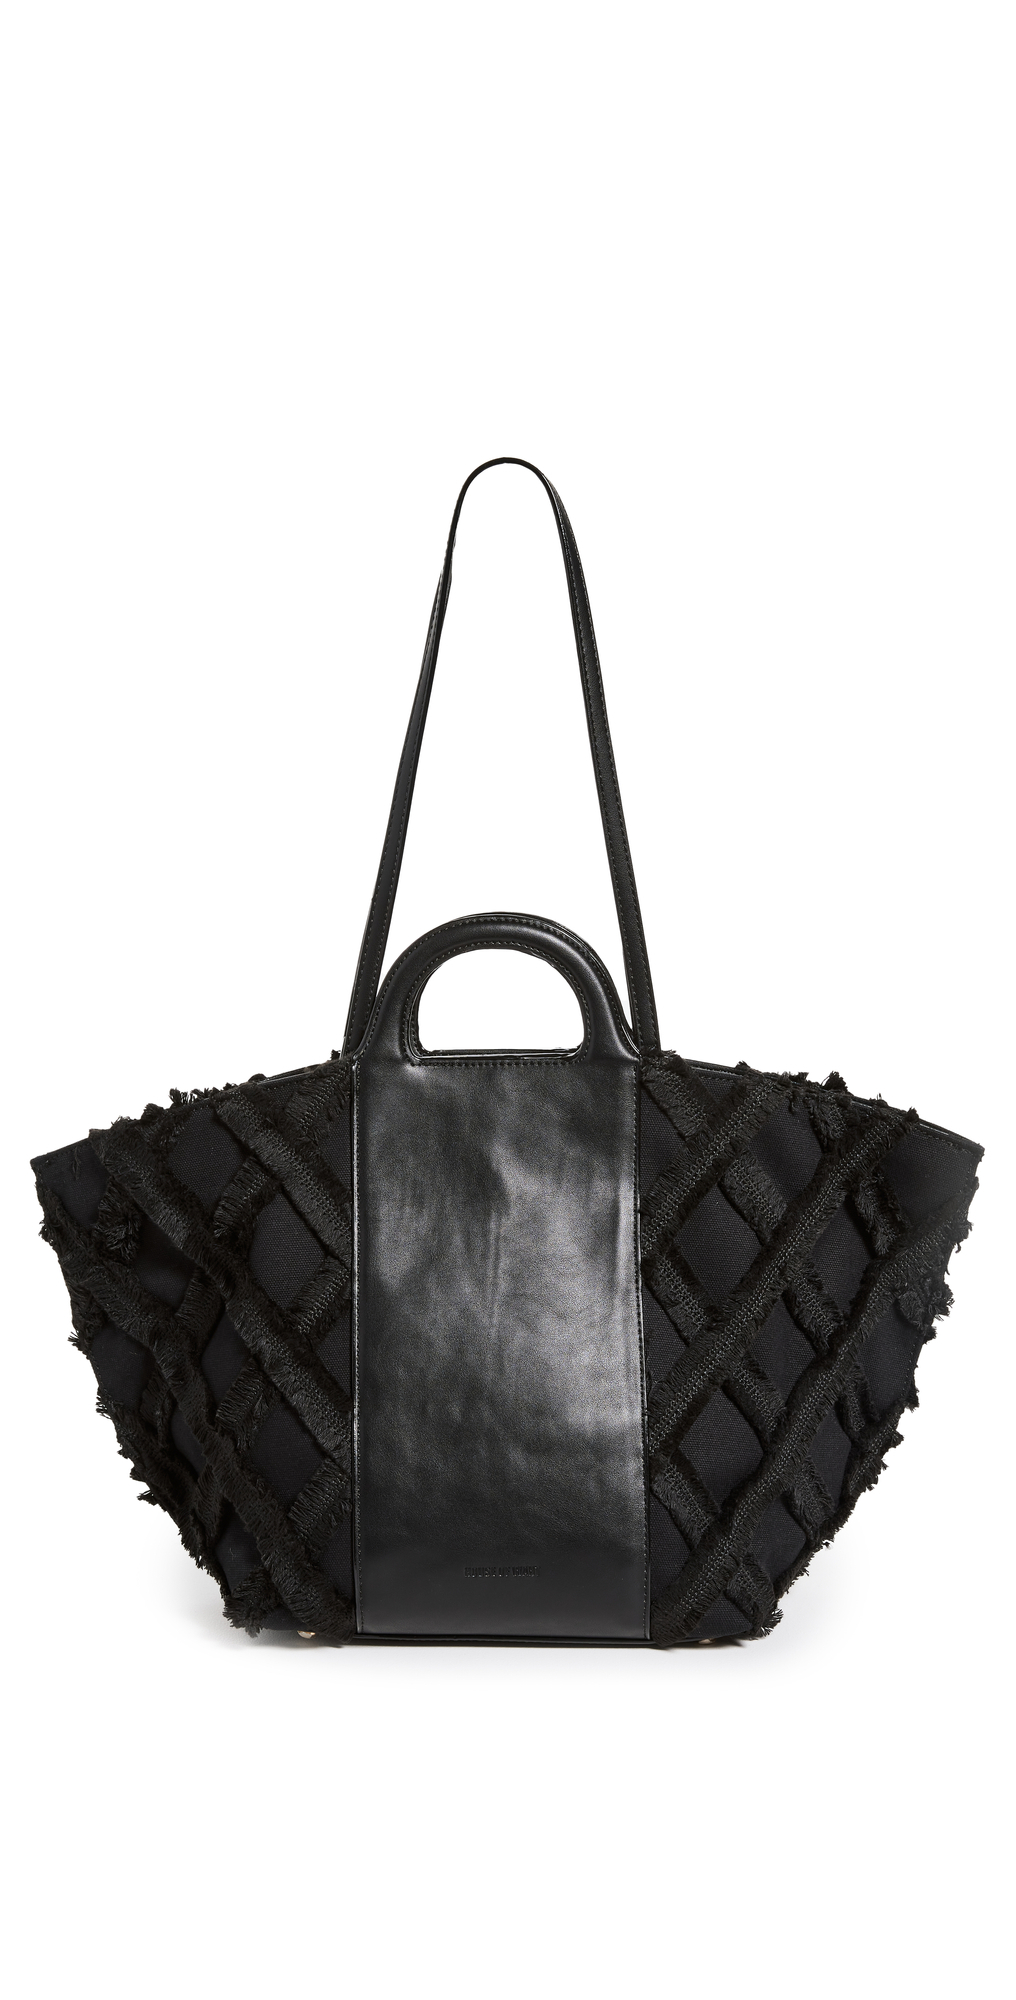 House of Want H.O.W. We Bring It Canvas Tote in black